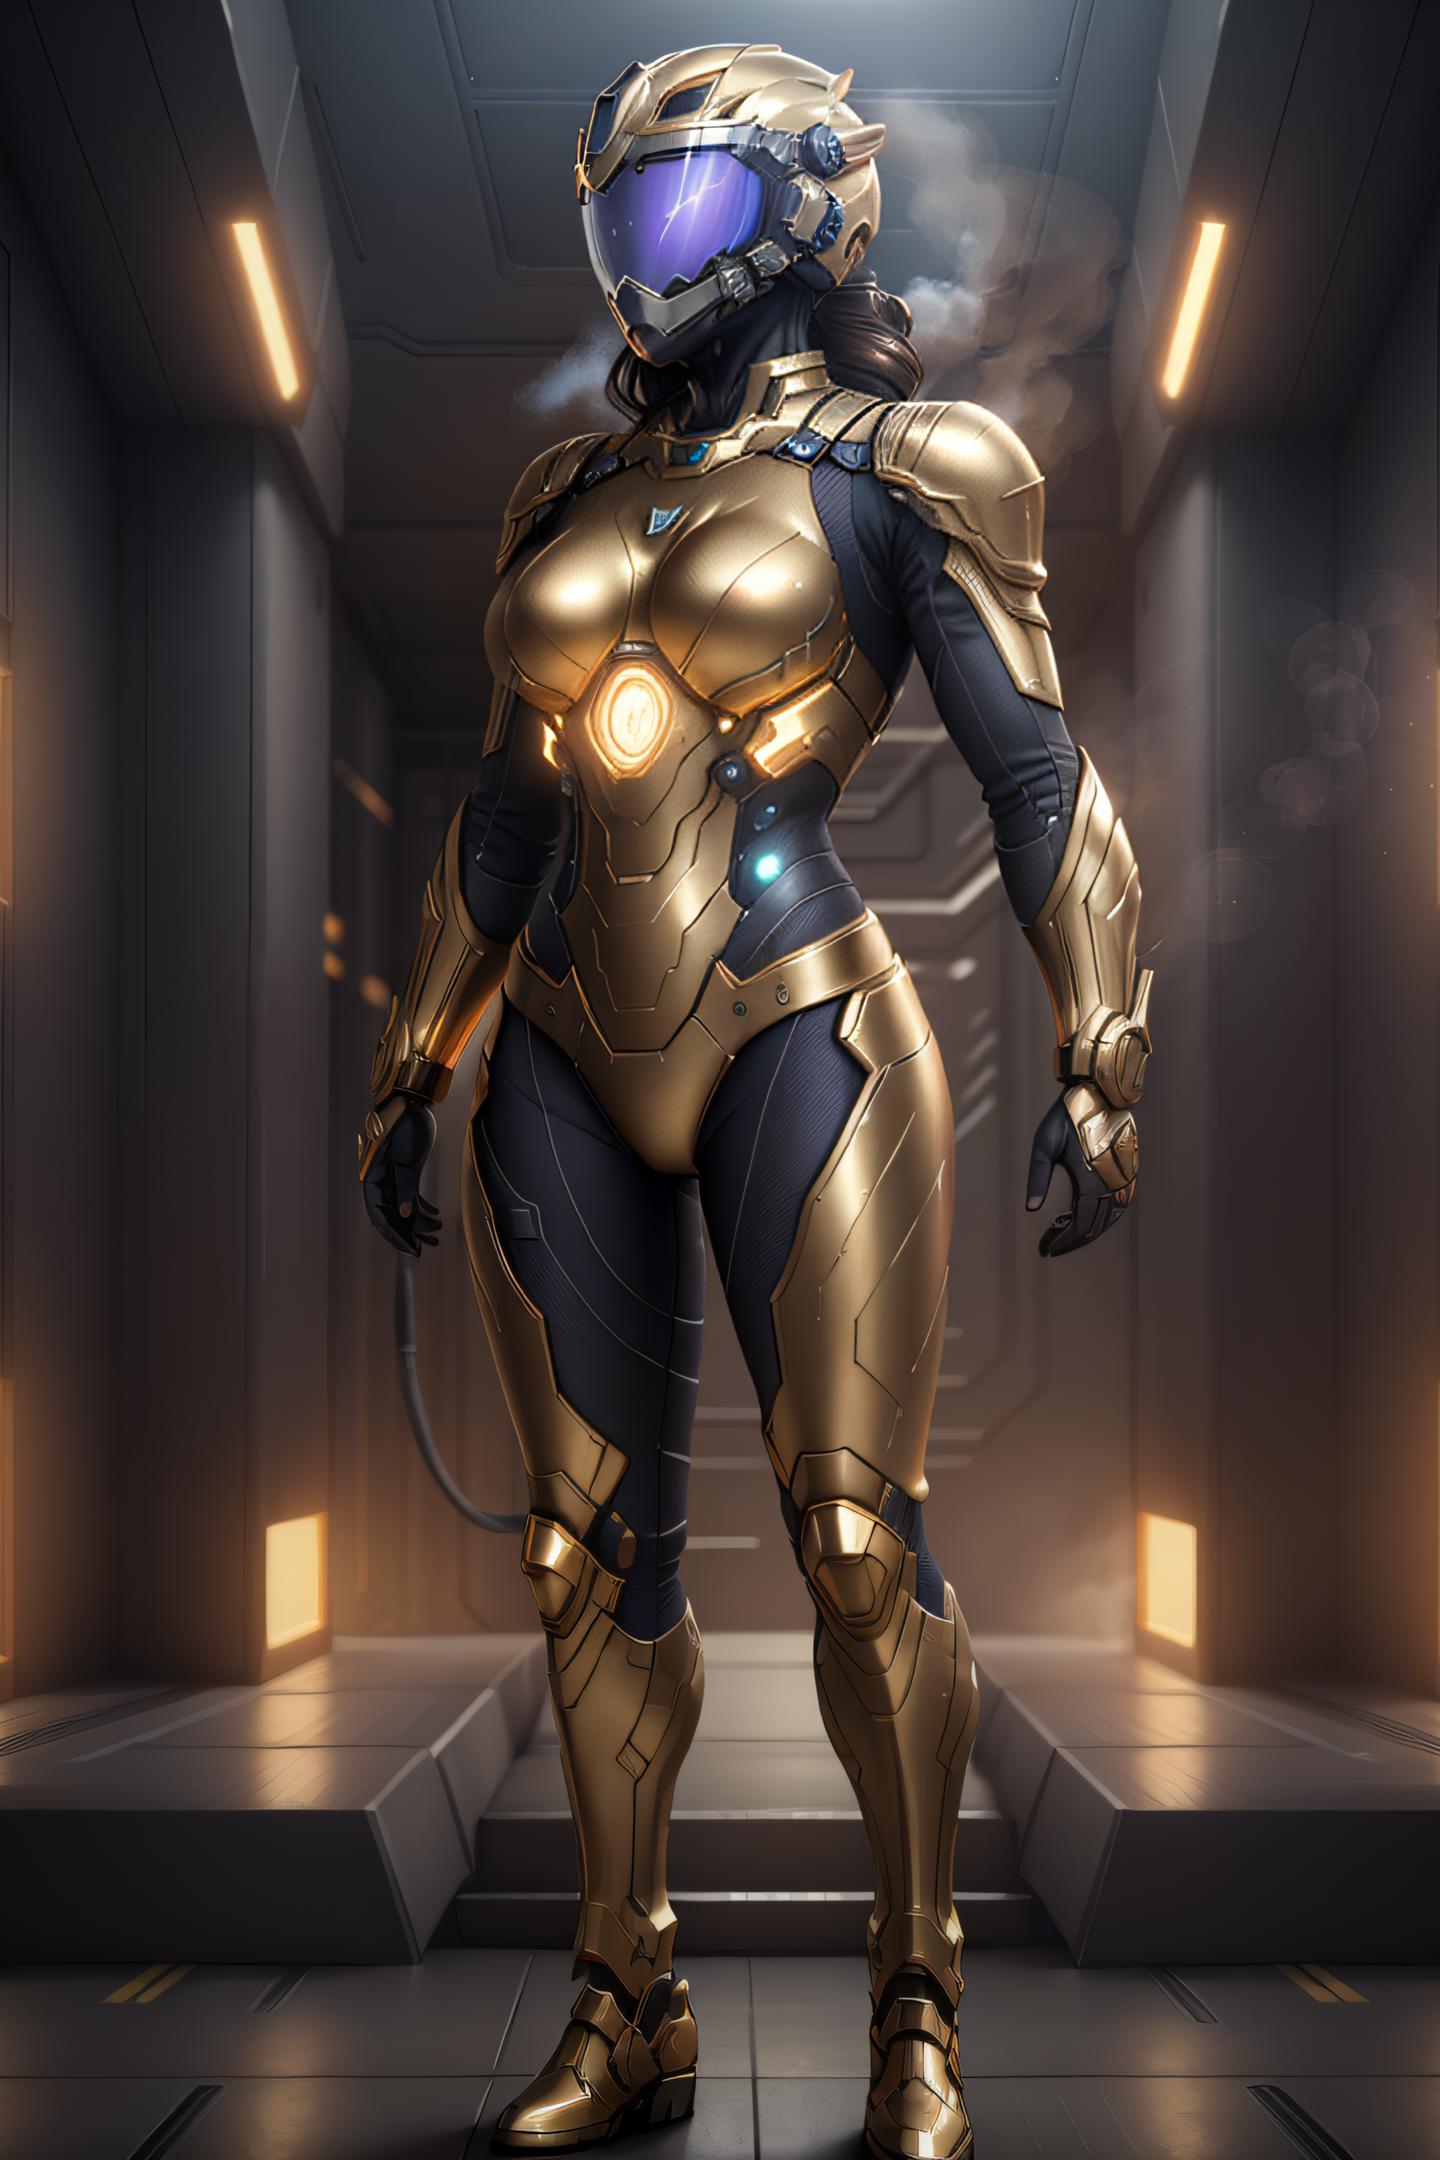 Nanosuit image by flying_in_the_cloud